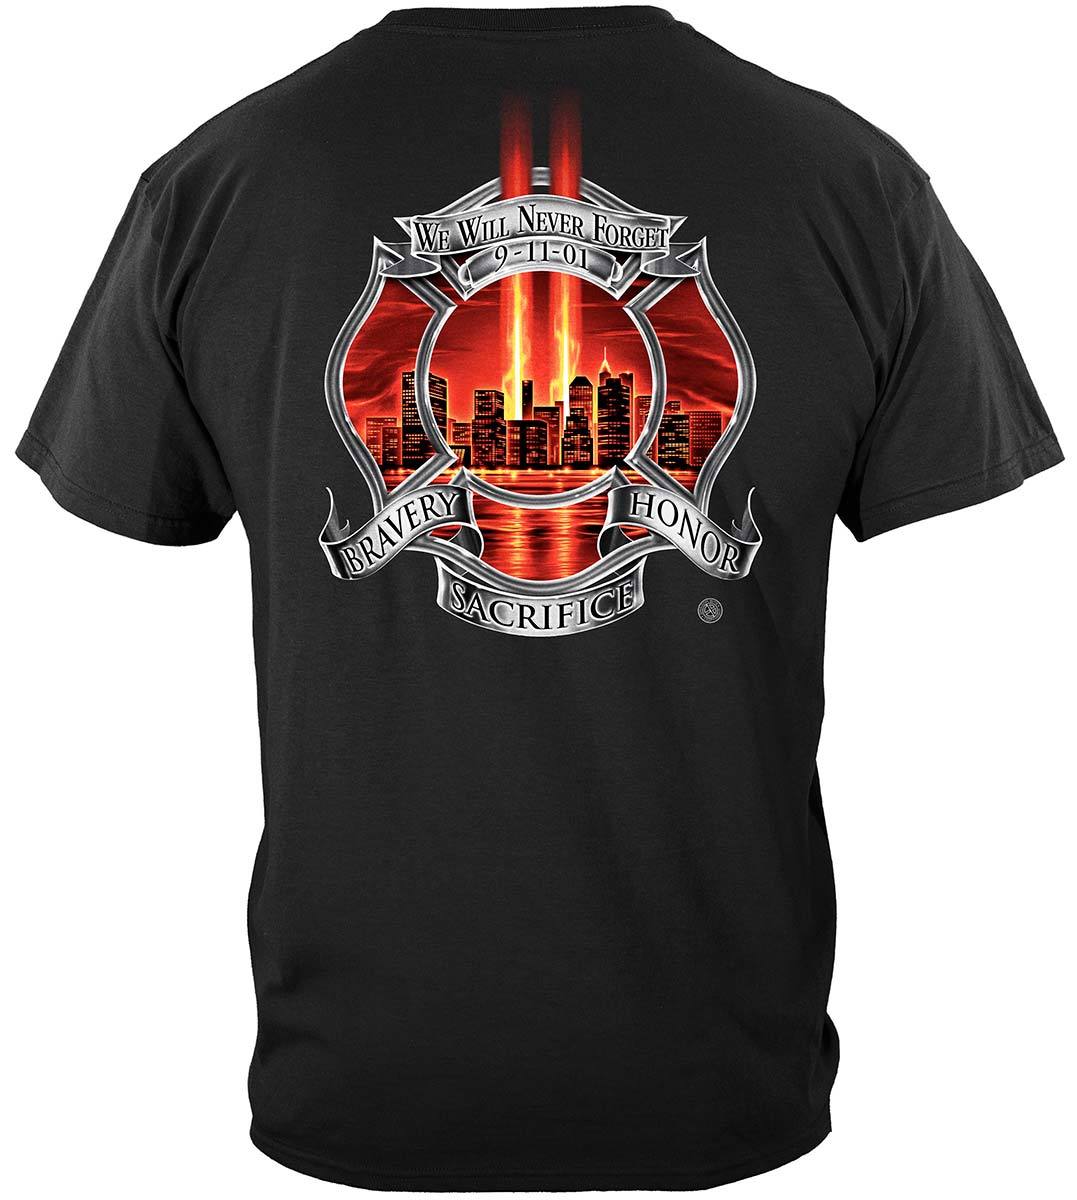 Red Tribute High Honor Firefighter Premium Long Sleeves